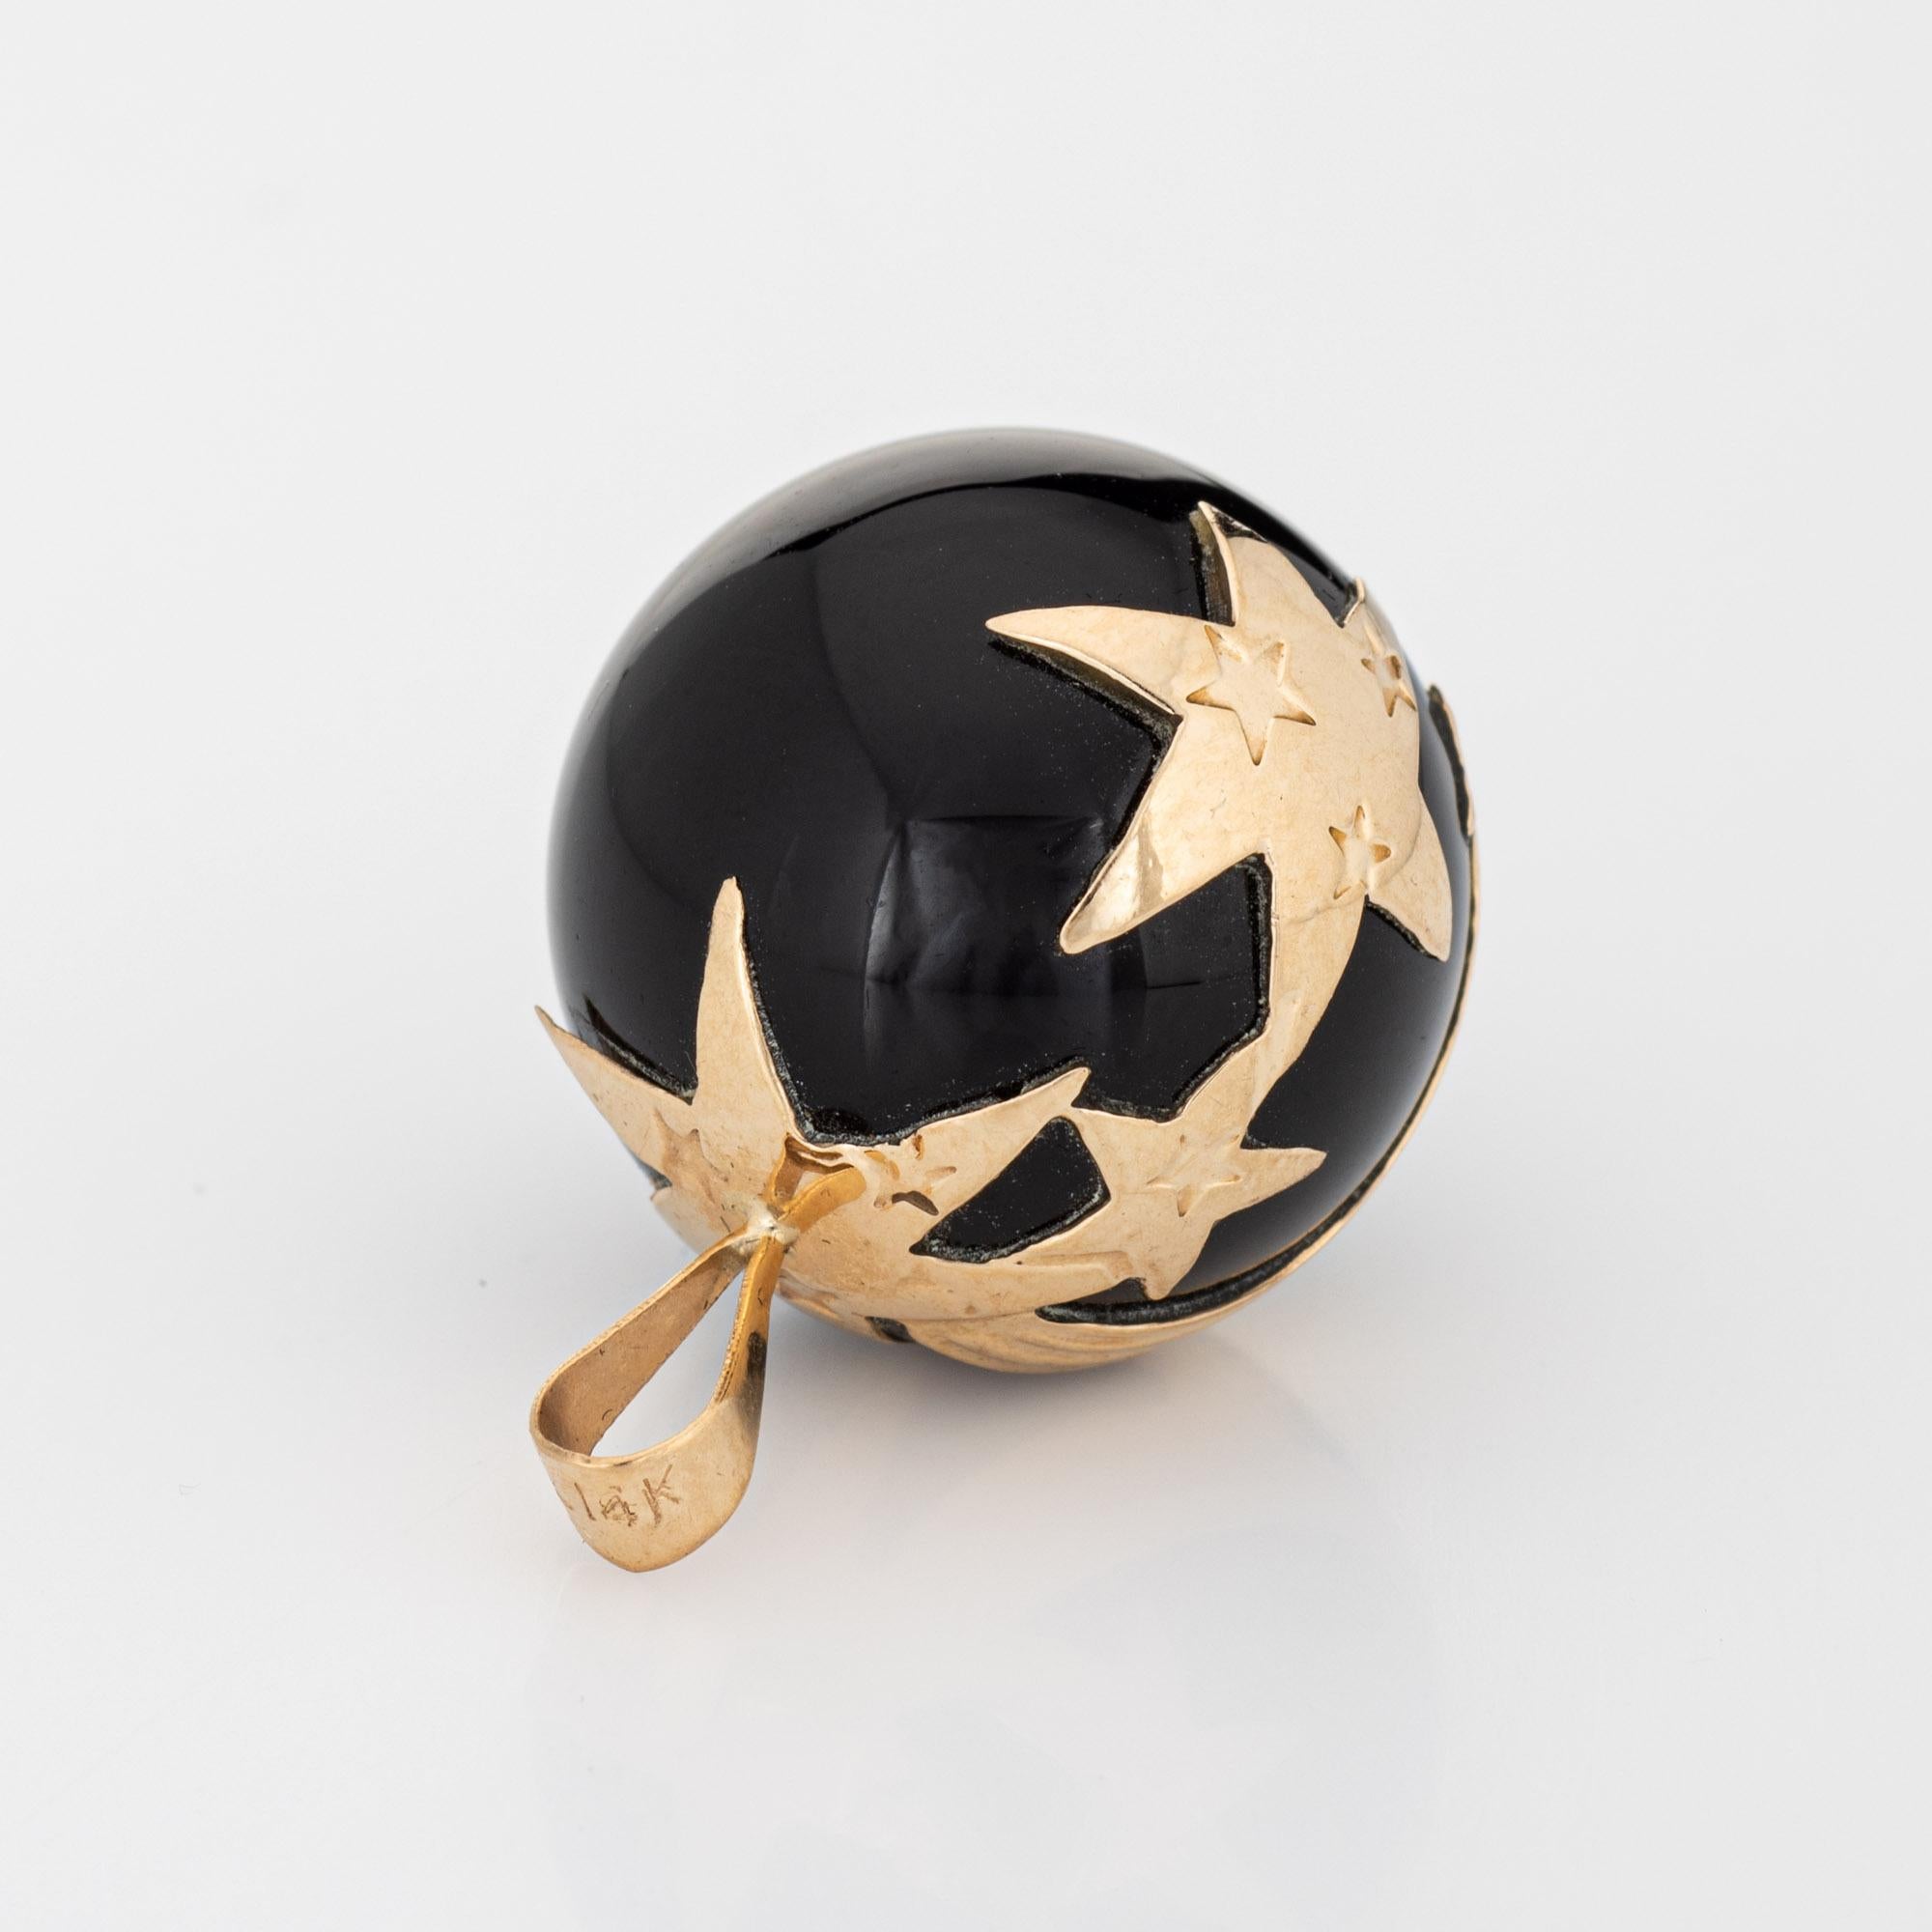 Finely detailed vintage shooting star onyx pendant crafted in 14k yellow gold (circa 1970s).  

The unique pendant features a shooting star pattern rendered in 14k yellow gold, set upon the onyx orb. The bale measures 3mm and can accommodate a thin